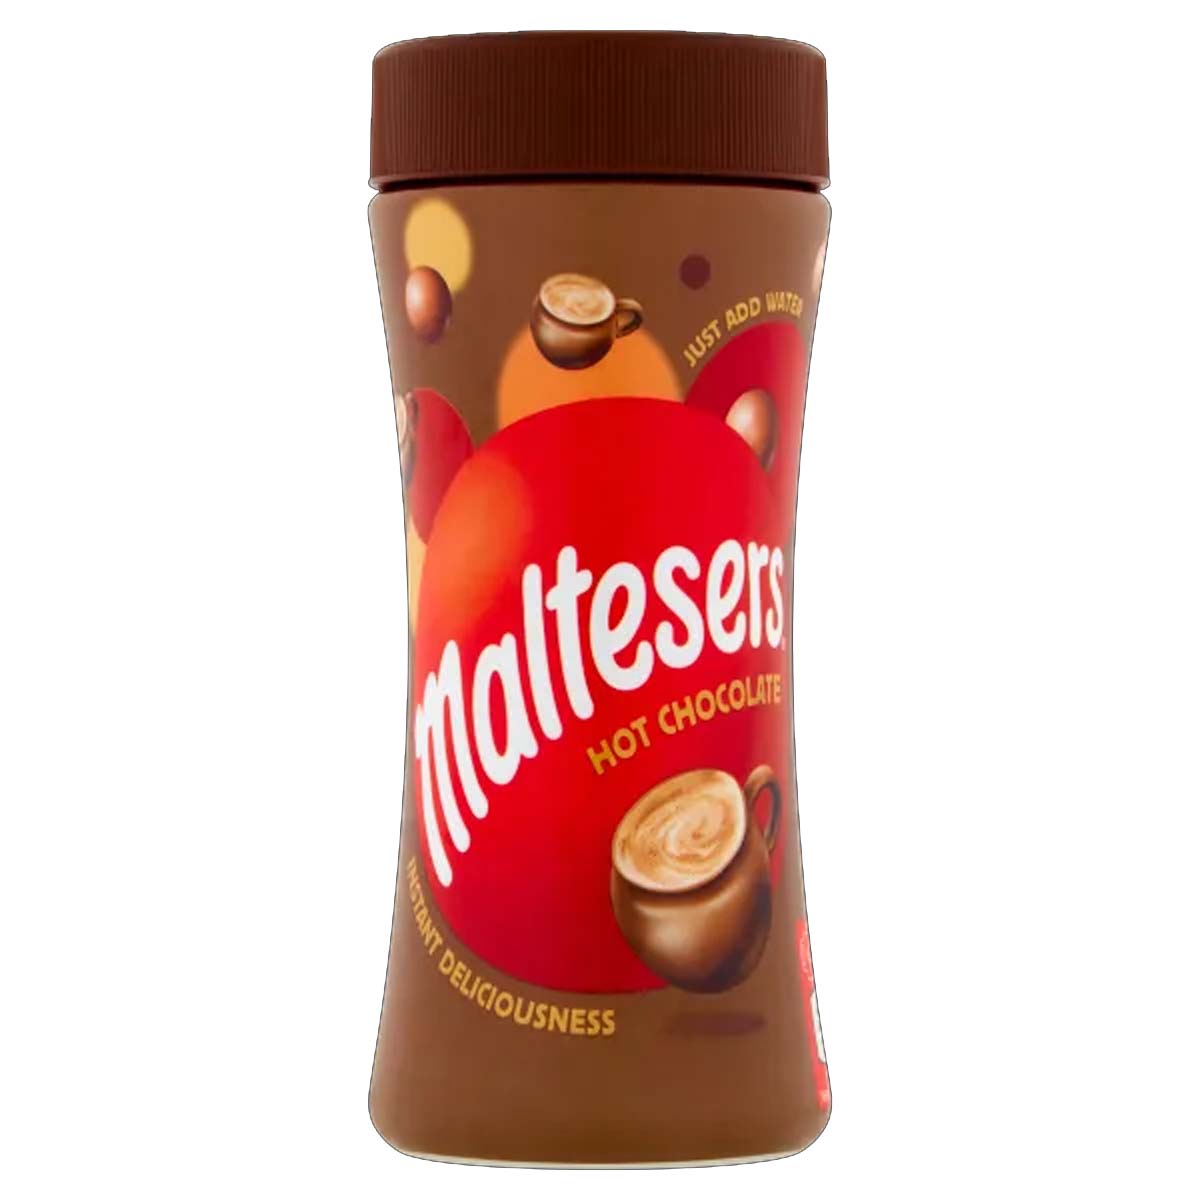 Maltesers - Instant Hot Chocolate - 225g - Continental Food Store